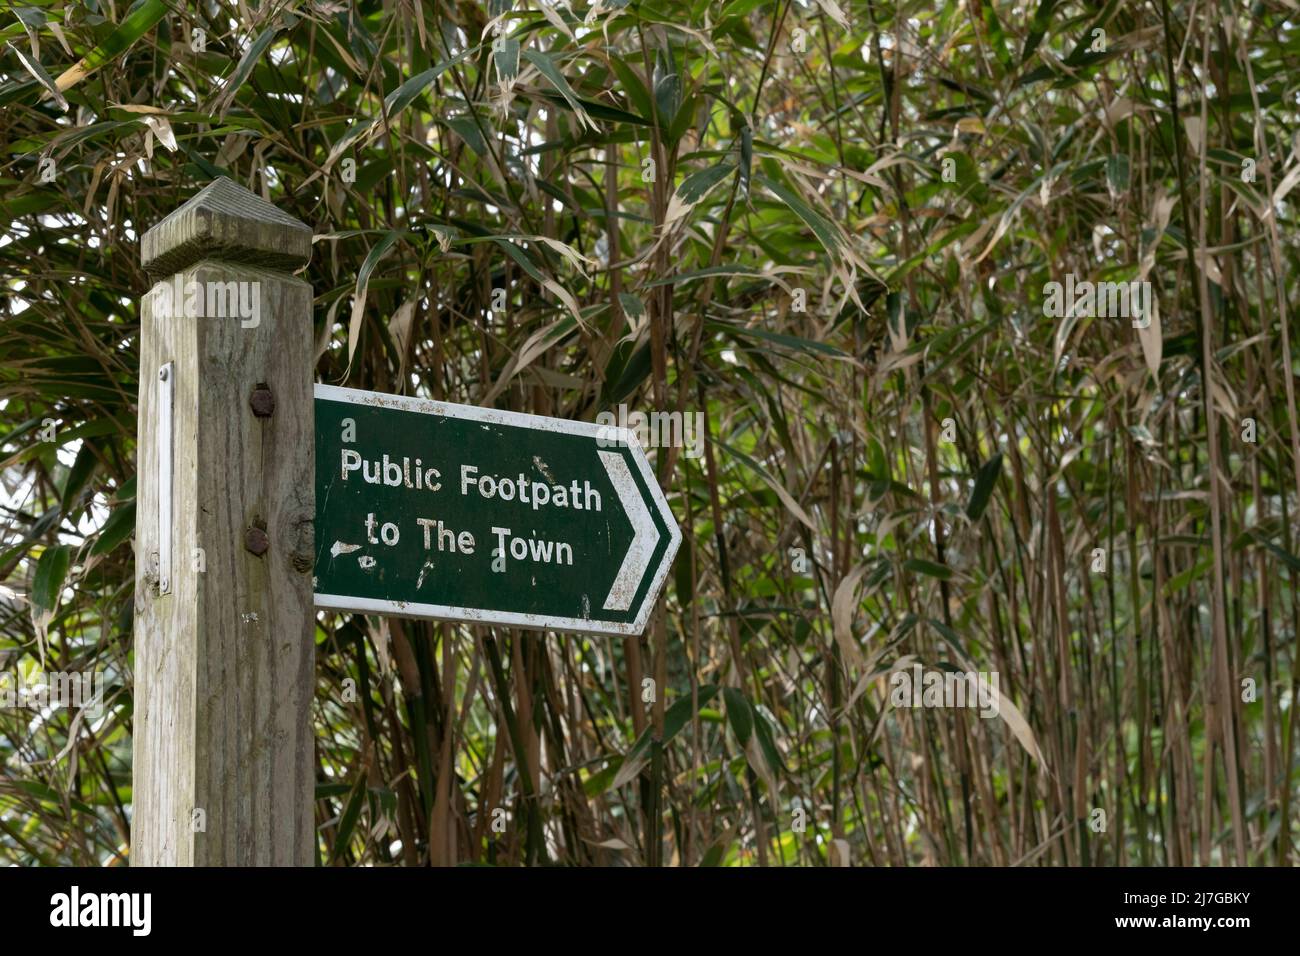 A sign pointing to a public footpath to the town. Stock Photo